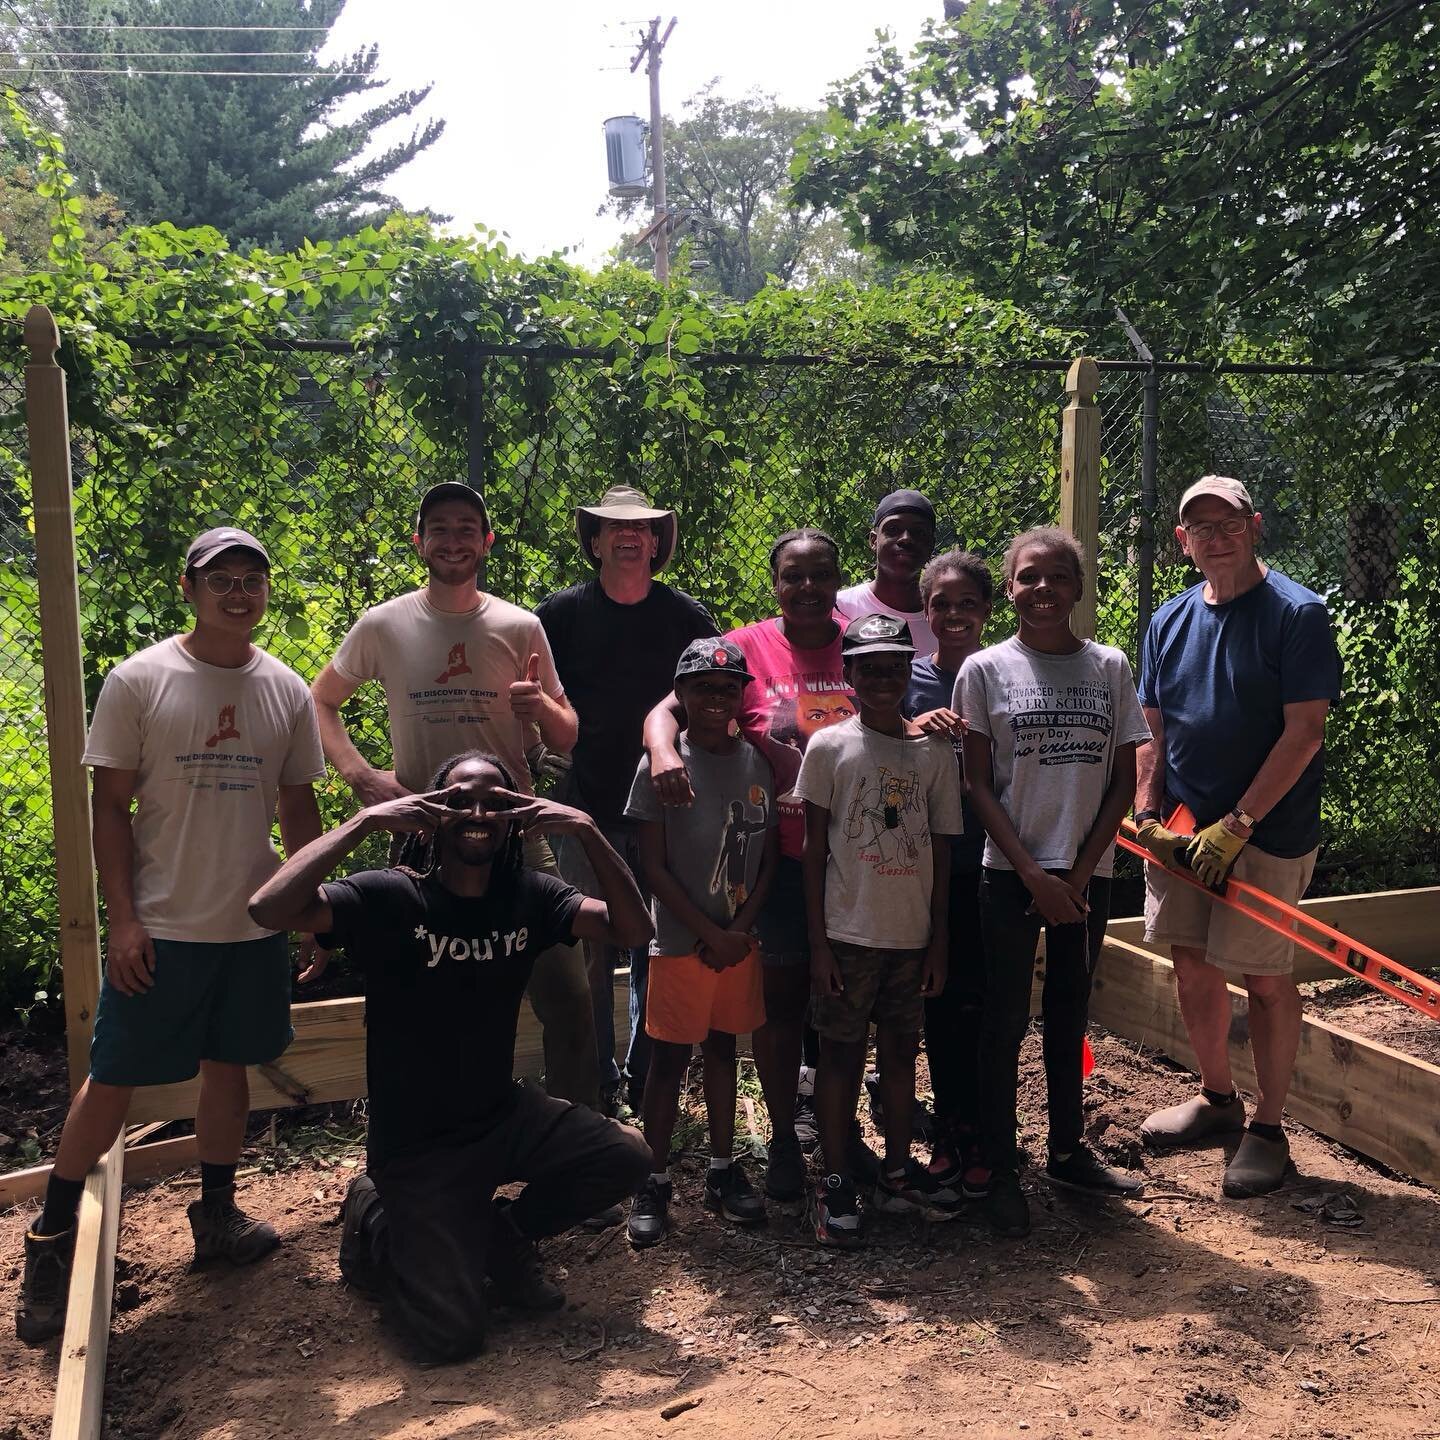 On August 5th, the Discovery Center hosted volunteers to help build our new compost bin system. We'd like to thank the volunteers for their hard work assisting with the building of the compost bins! The new system will help The Discovery Center reduc